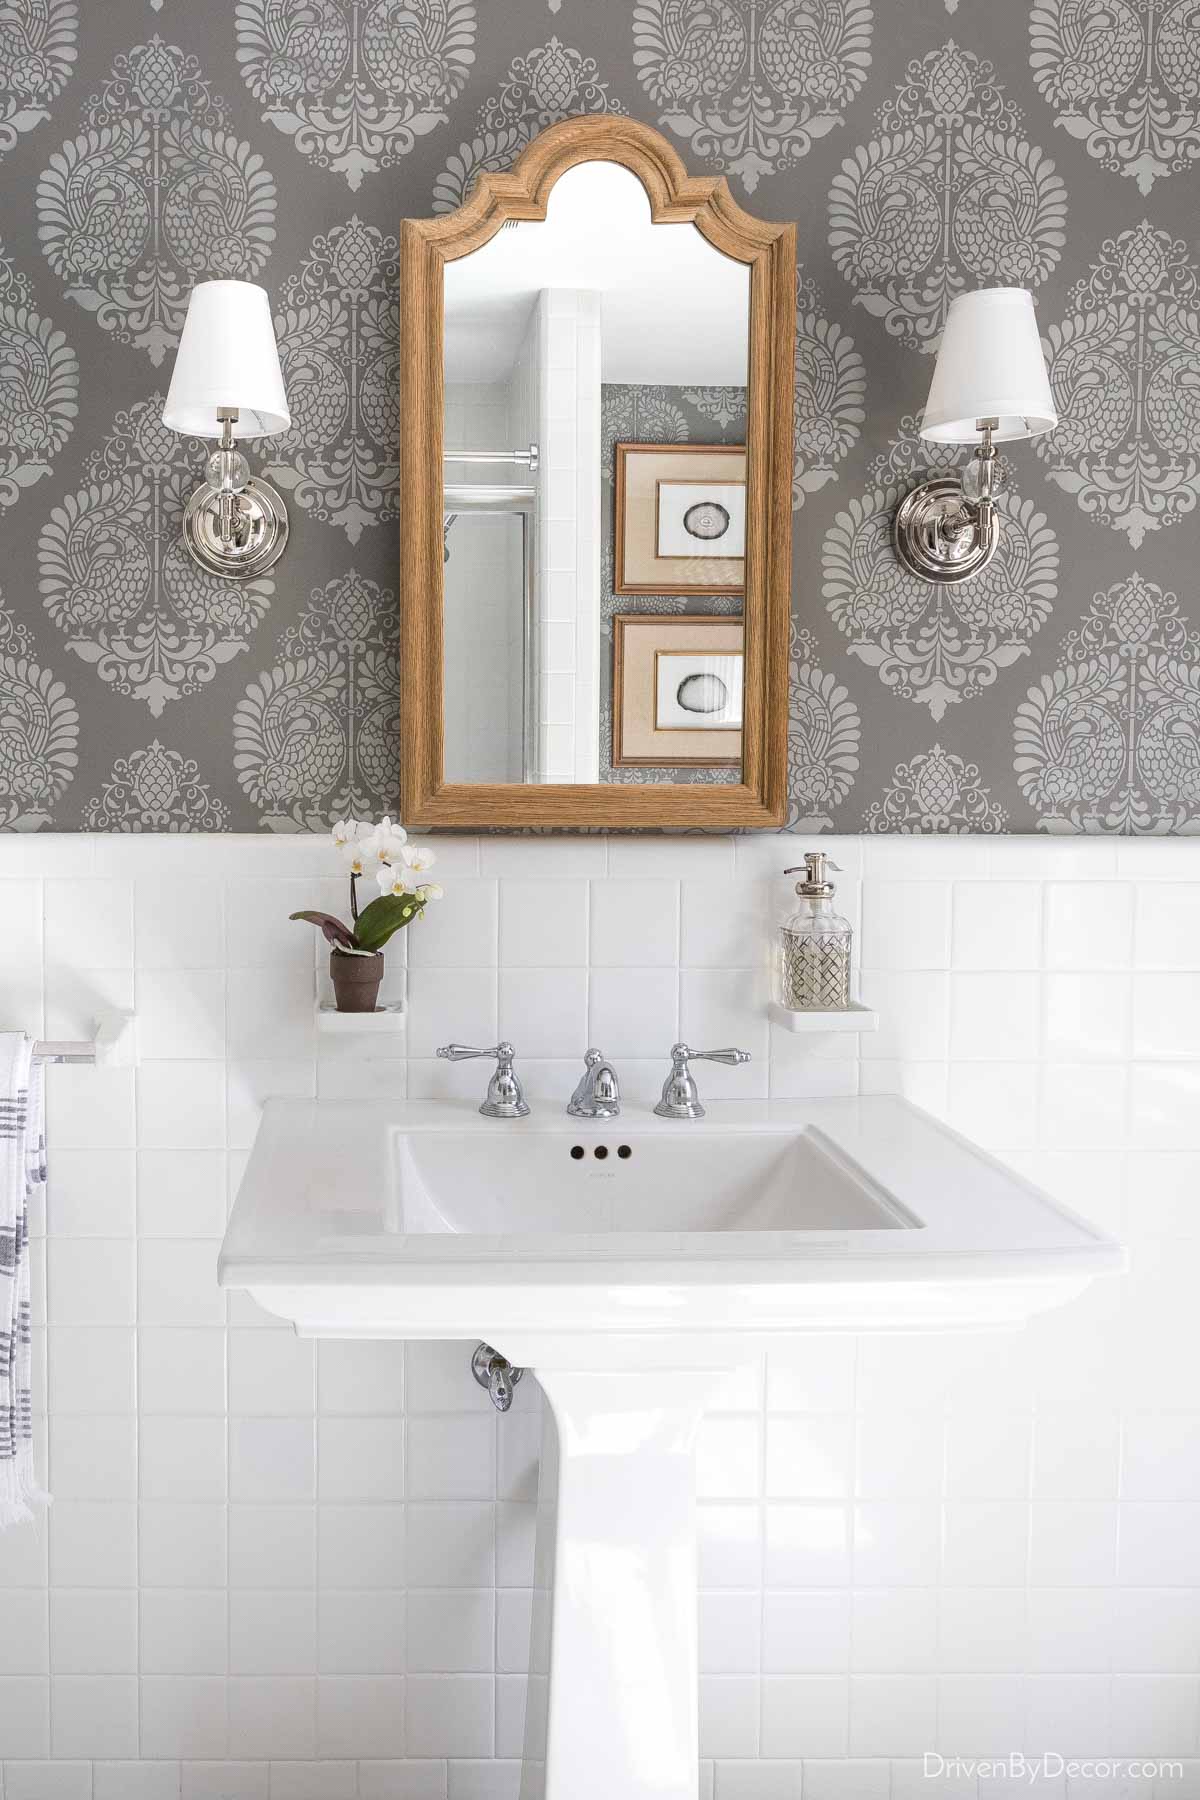 Powder room sink with wall stencils used to create wallpaper-like pattern on walls